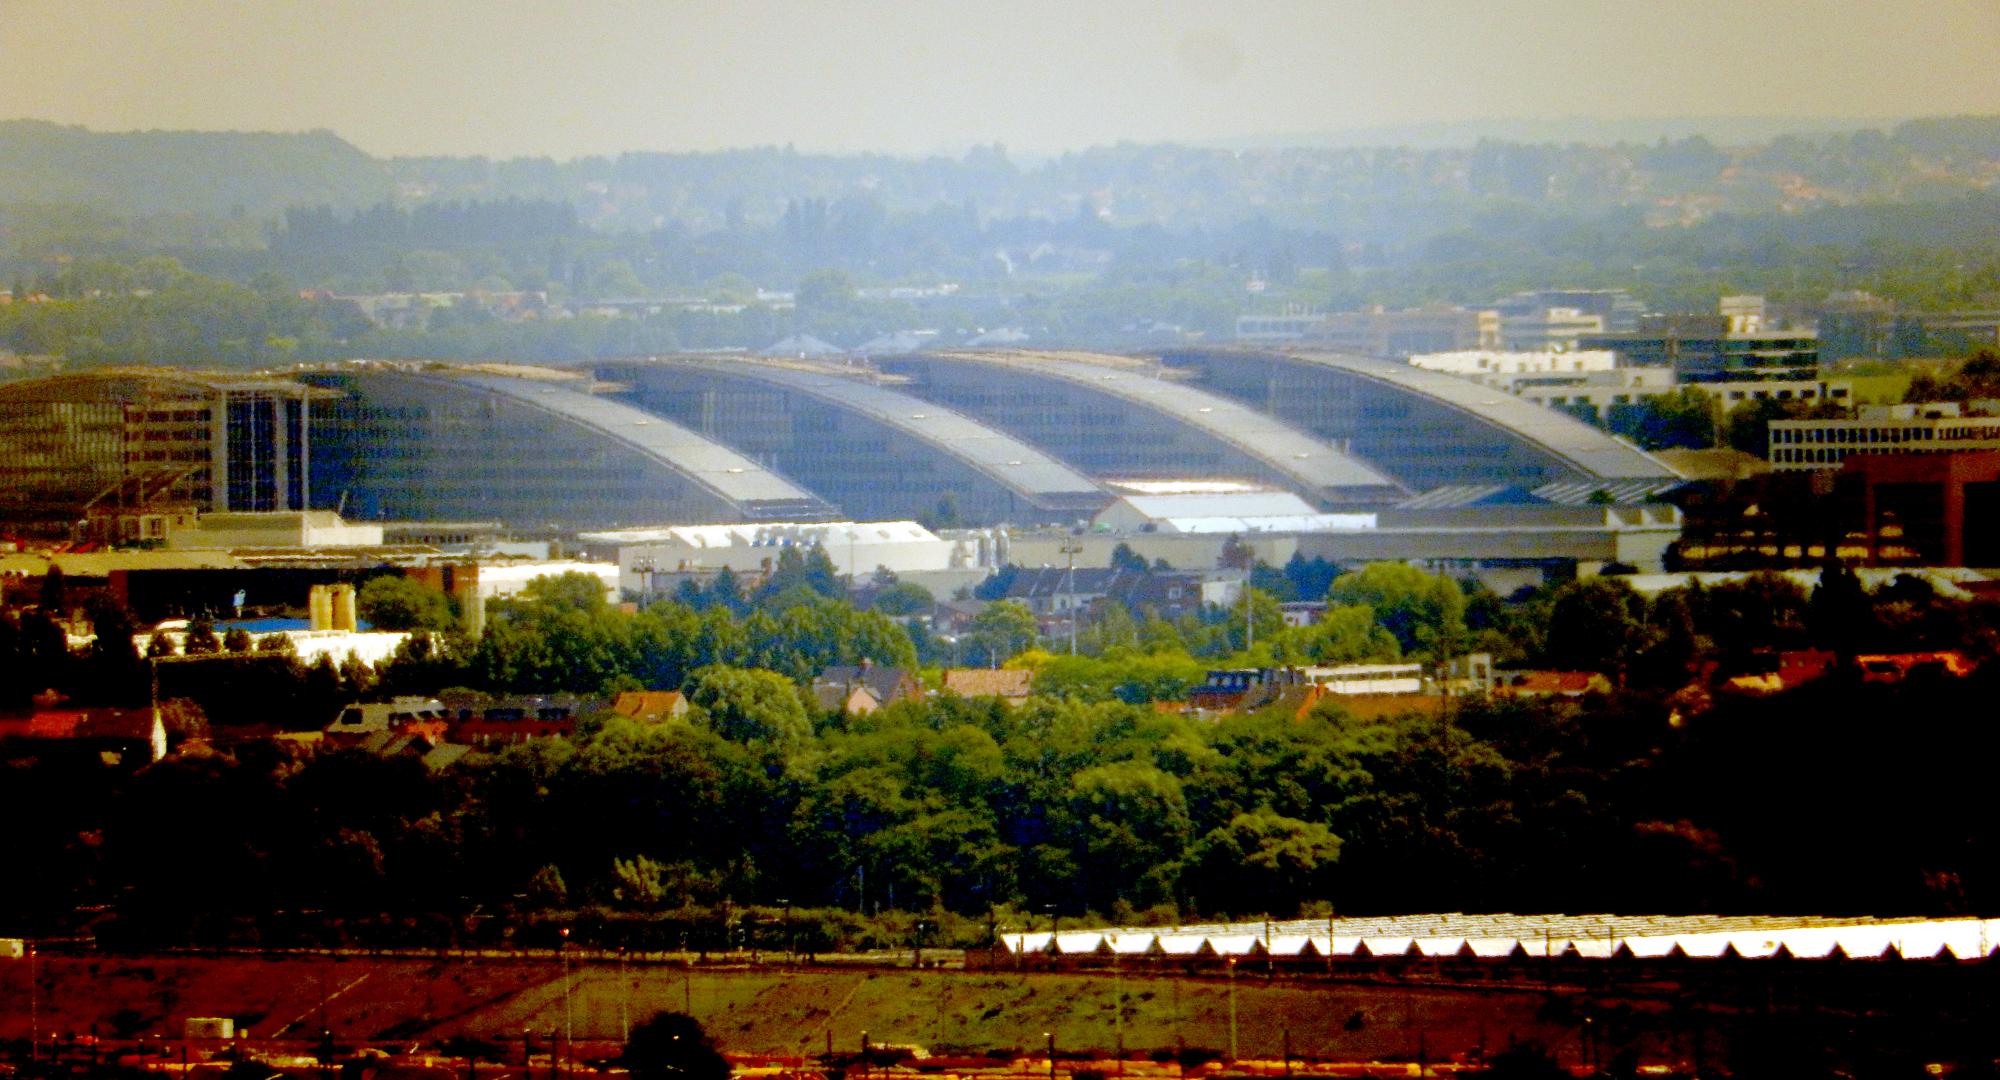 Brussels (2010-2016) - New Nato HQ